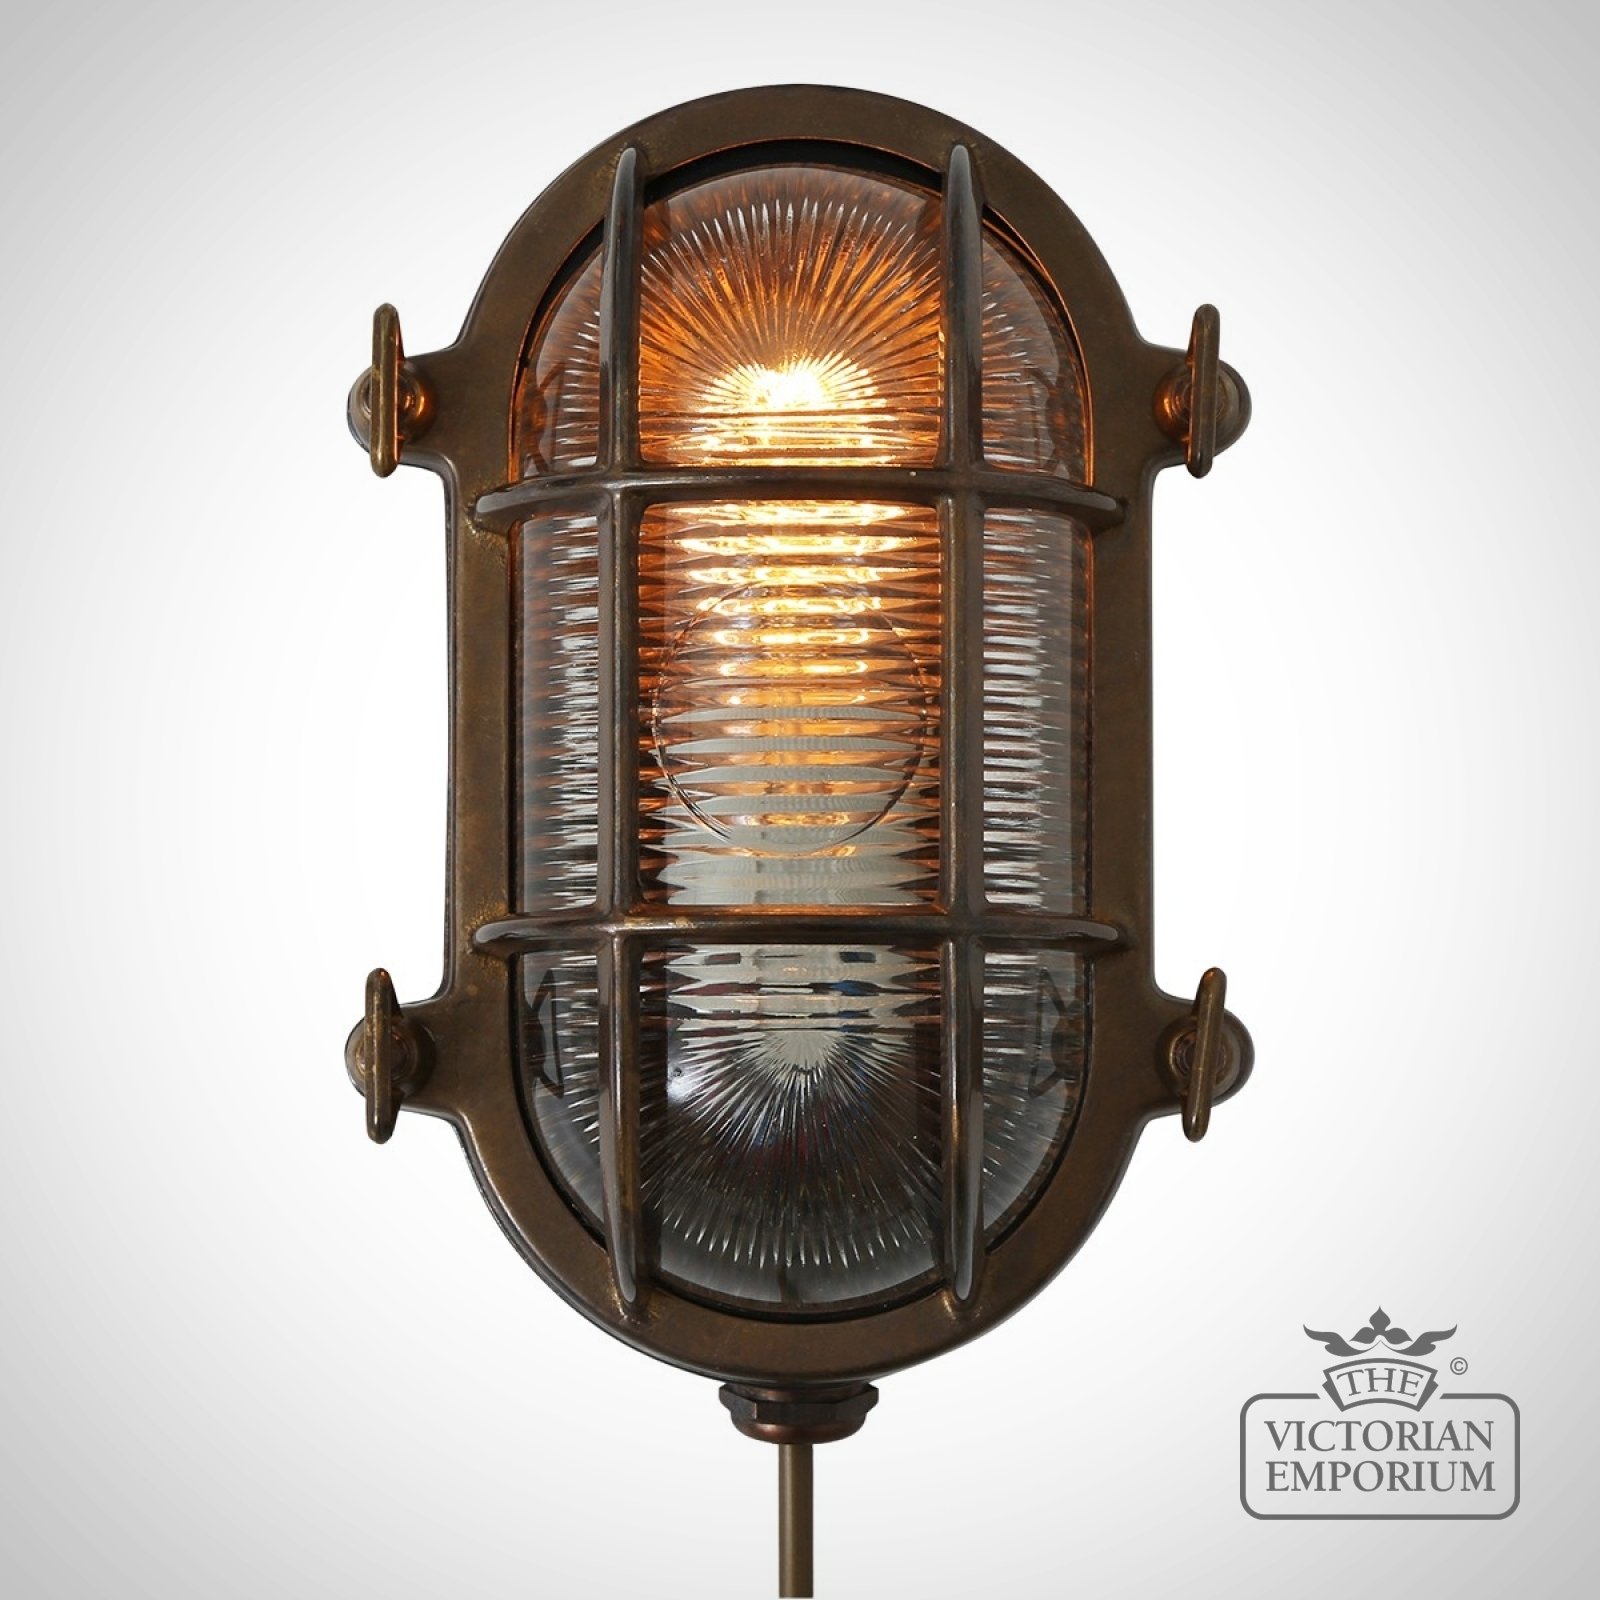 Ruben Oval Marine Light in a choice of finishes